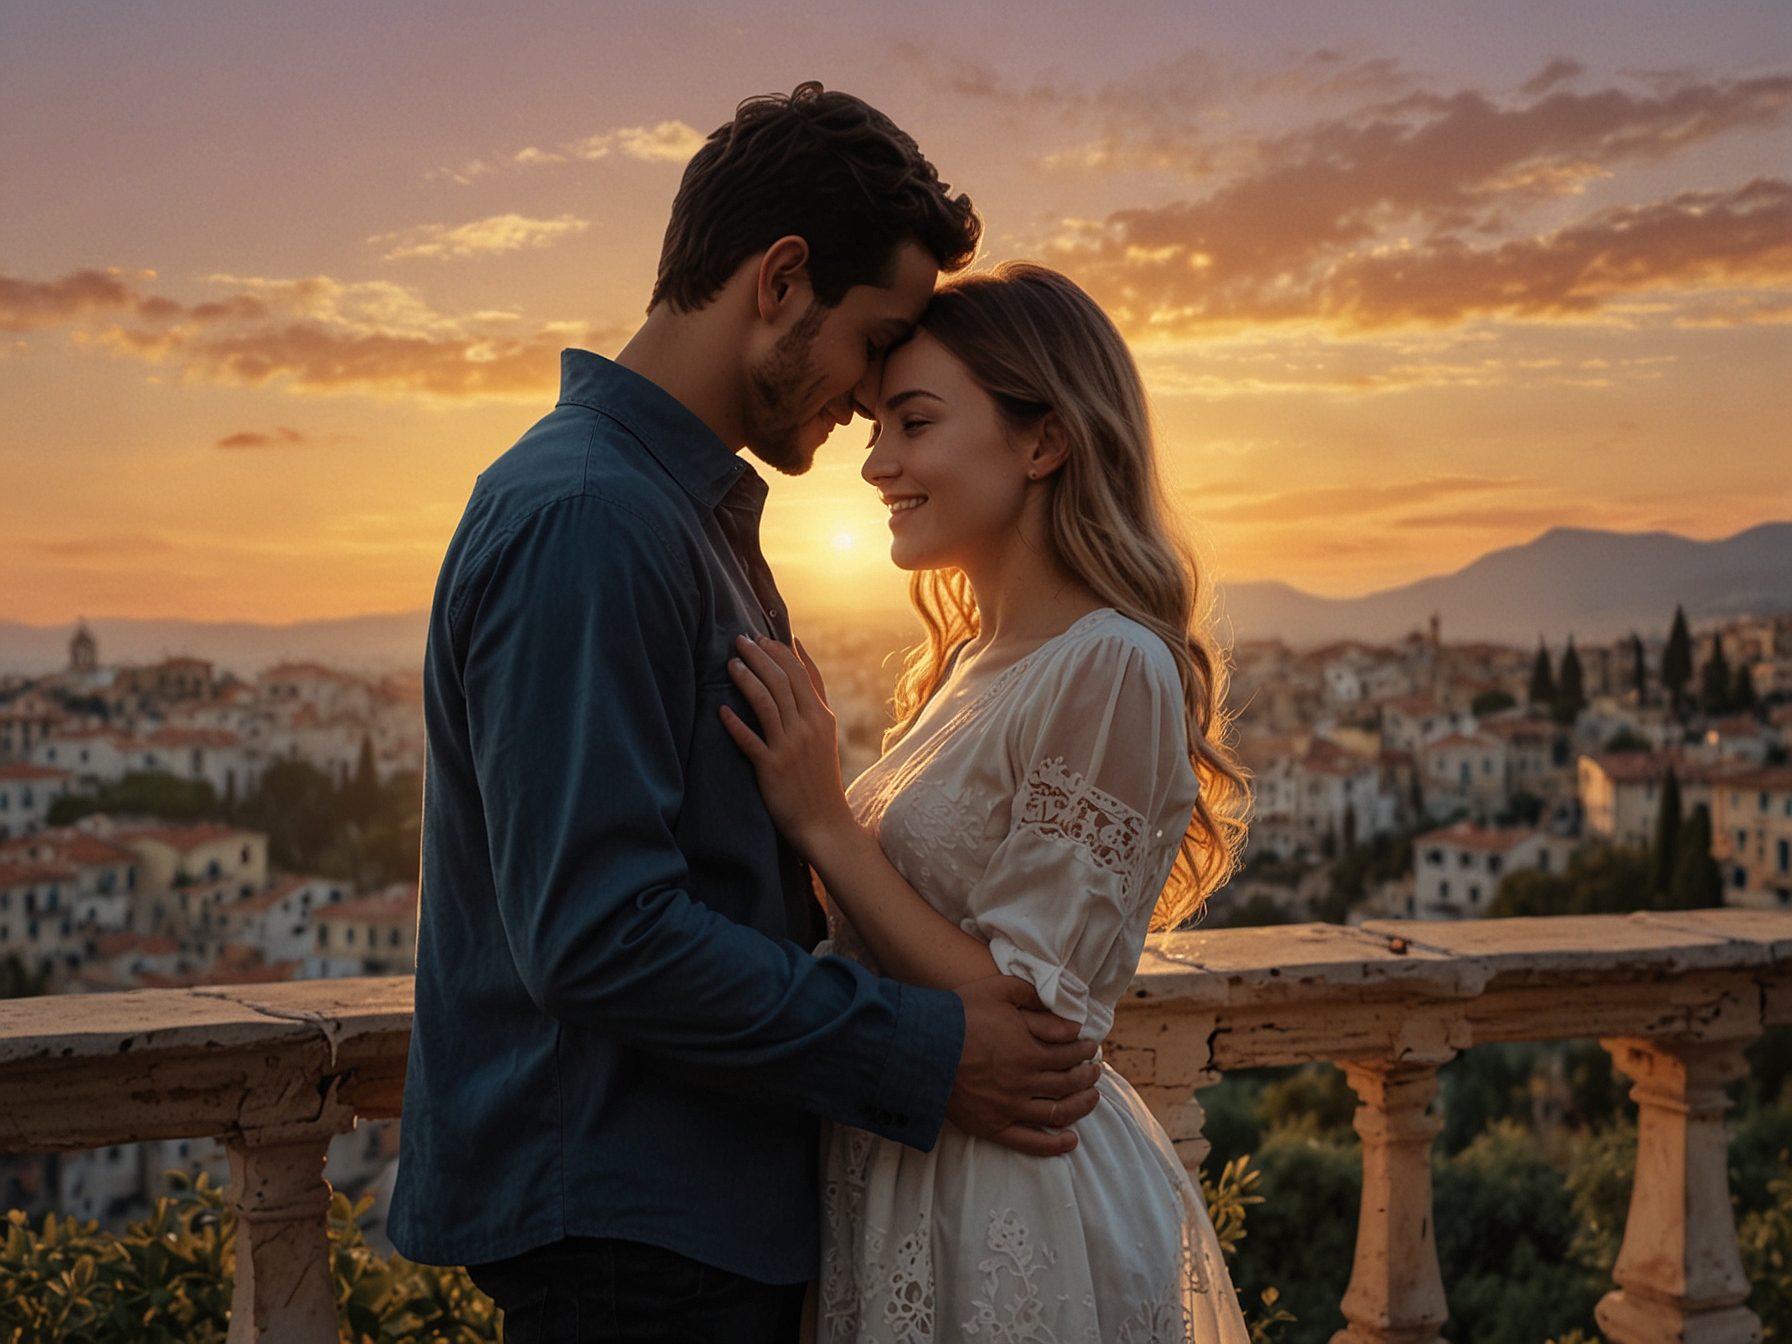 Jordan Love proposes to his girlfriend, Ronika Stone, against the stunning backdrop of an Italian sunset, capturing a heartwarming and unforgettable moment of their engagement.